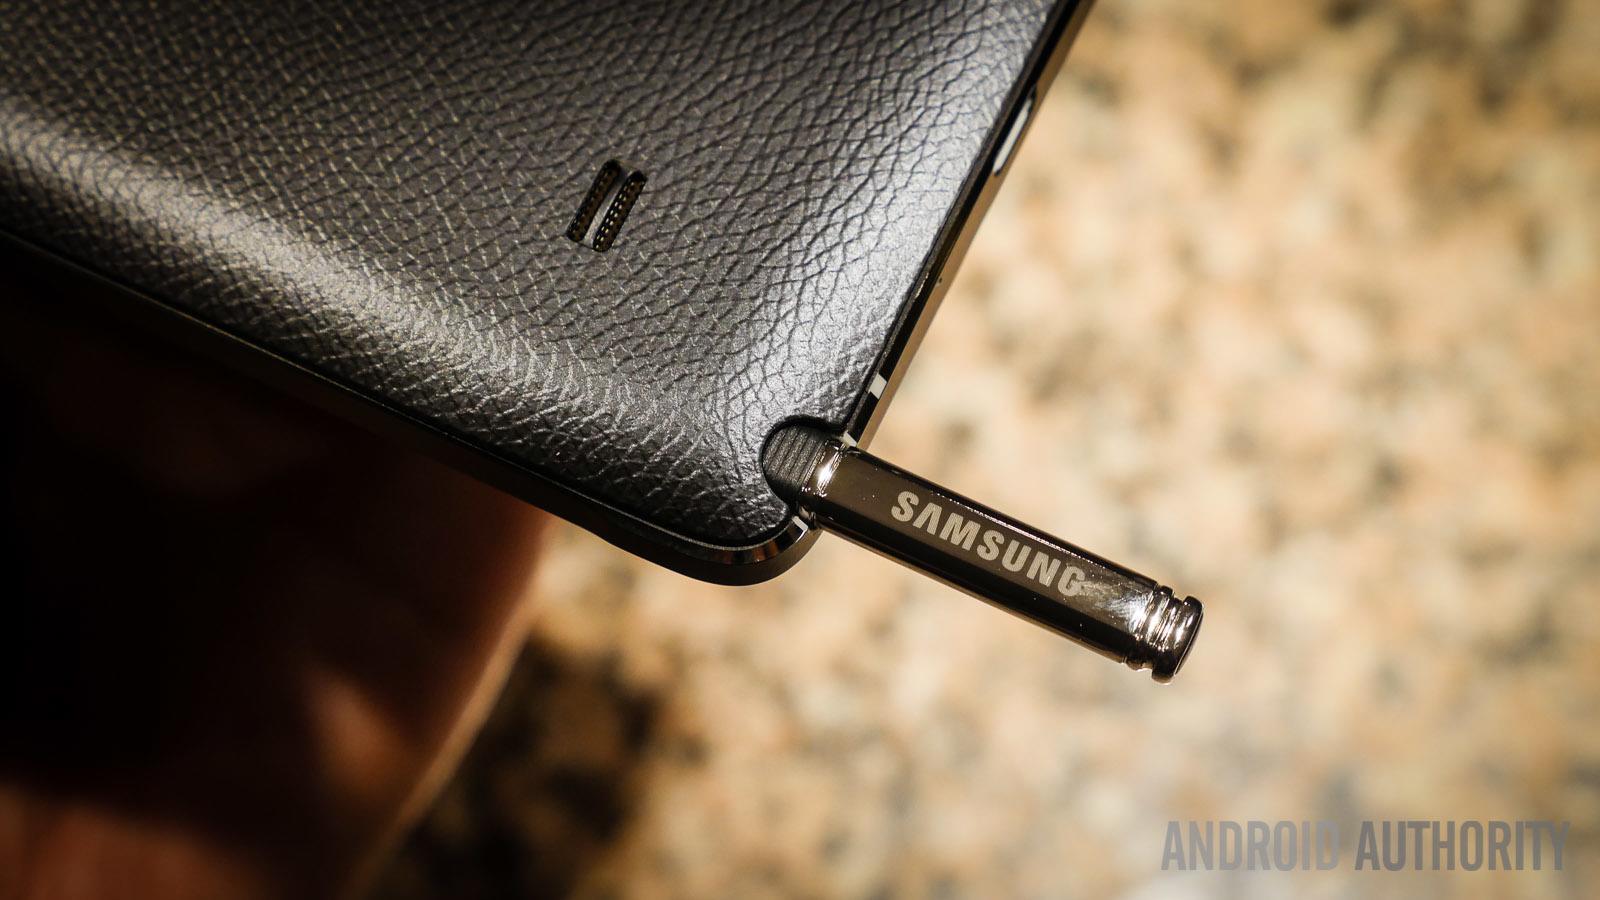 samsung galaxy note 4 first impressions (9 of 20)